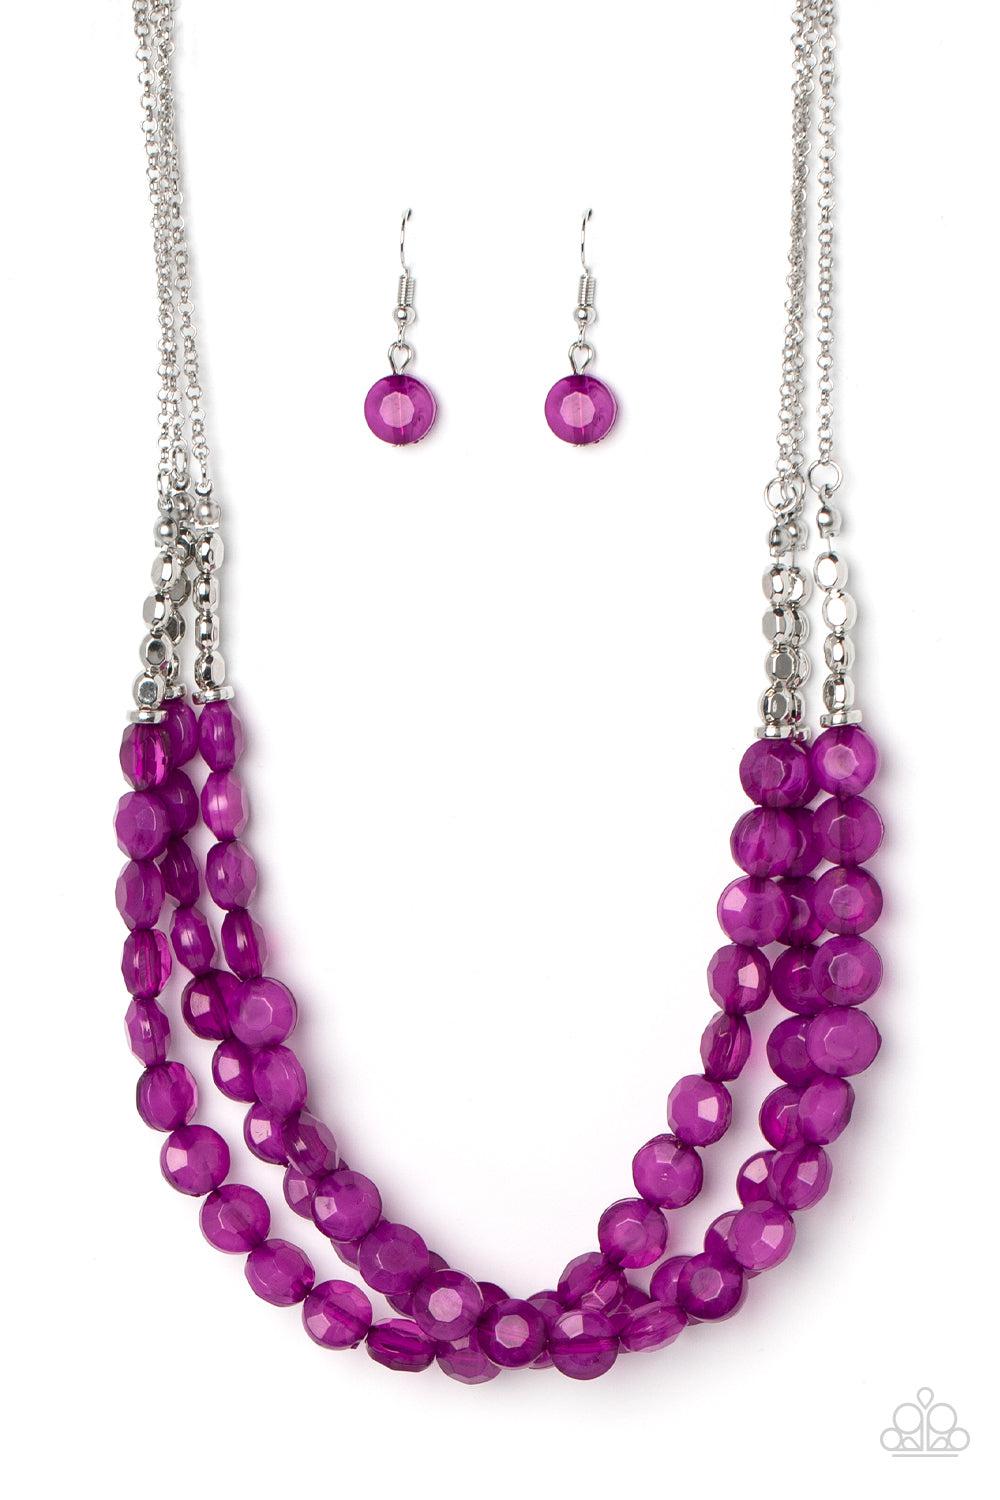 Pacific Picnic Purple Necklace - Paparazzi Accessories- lightbox - CarasShop.com - $5 Jewelry by Cara Jewels